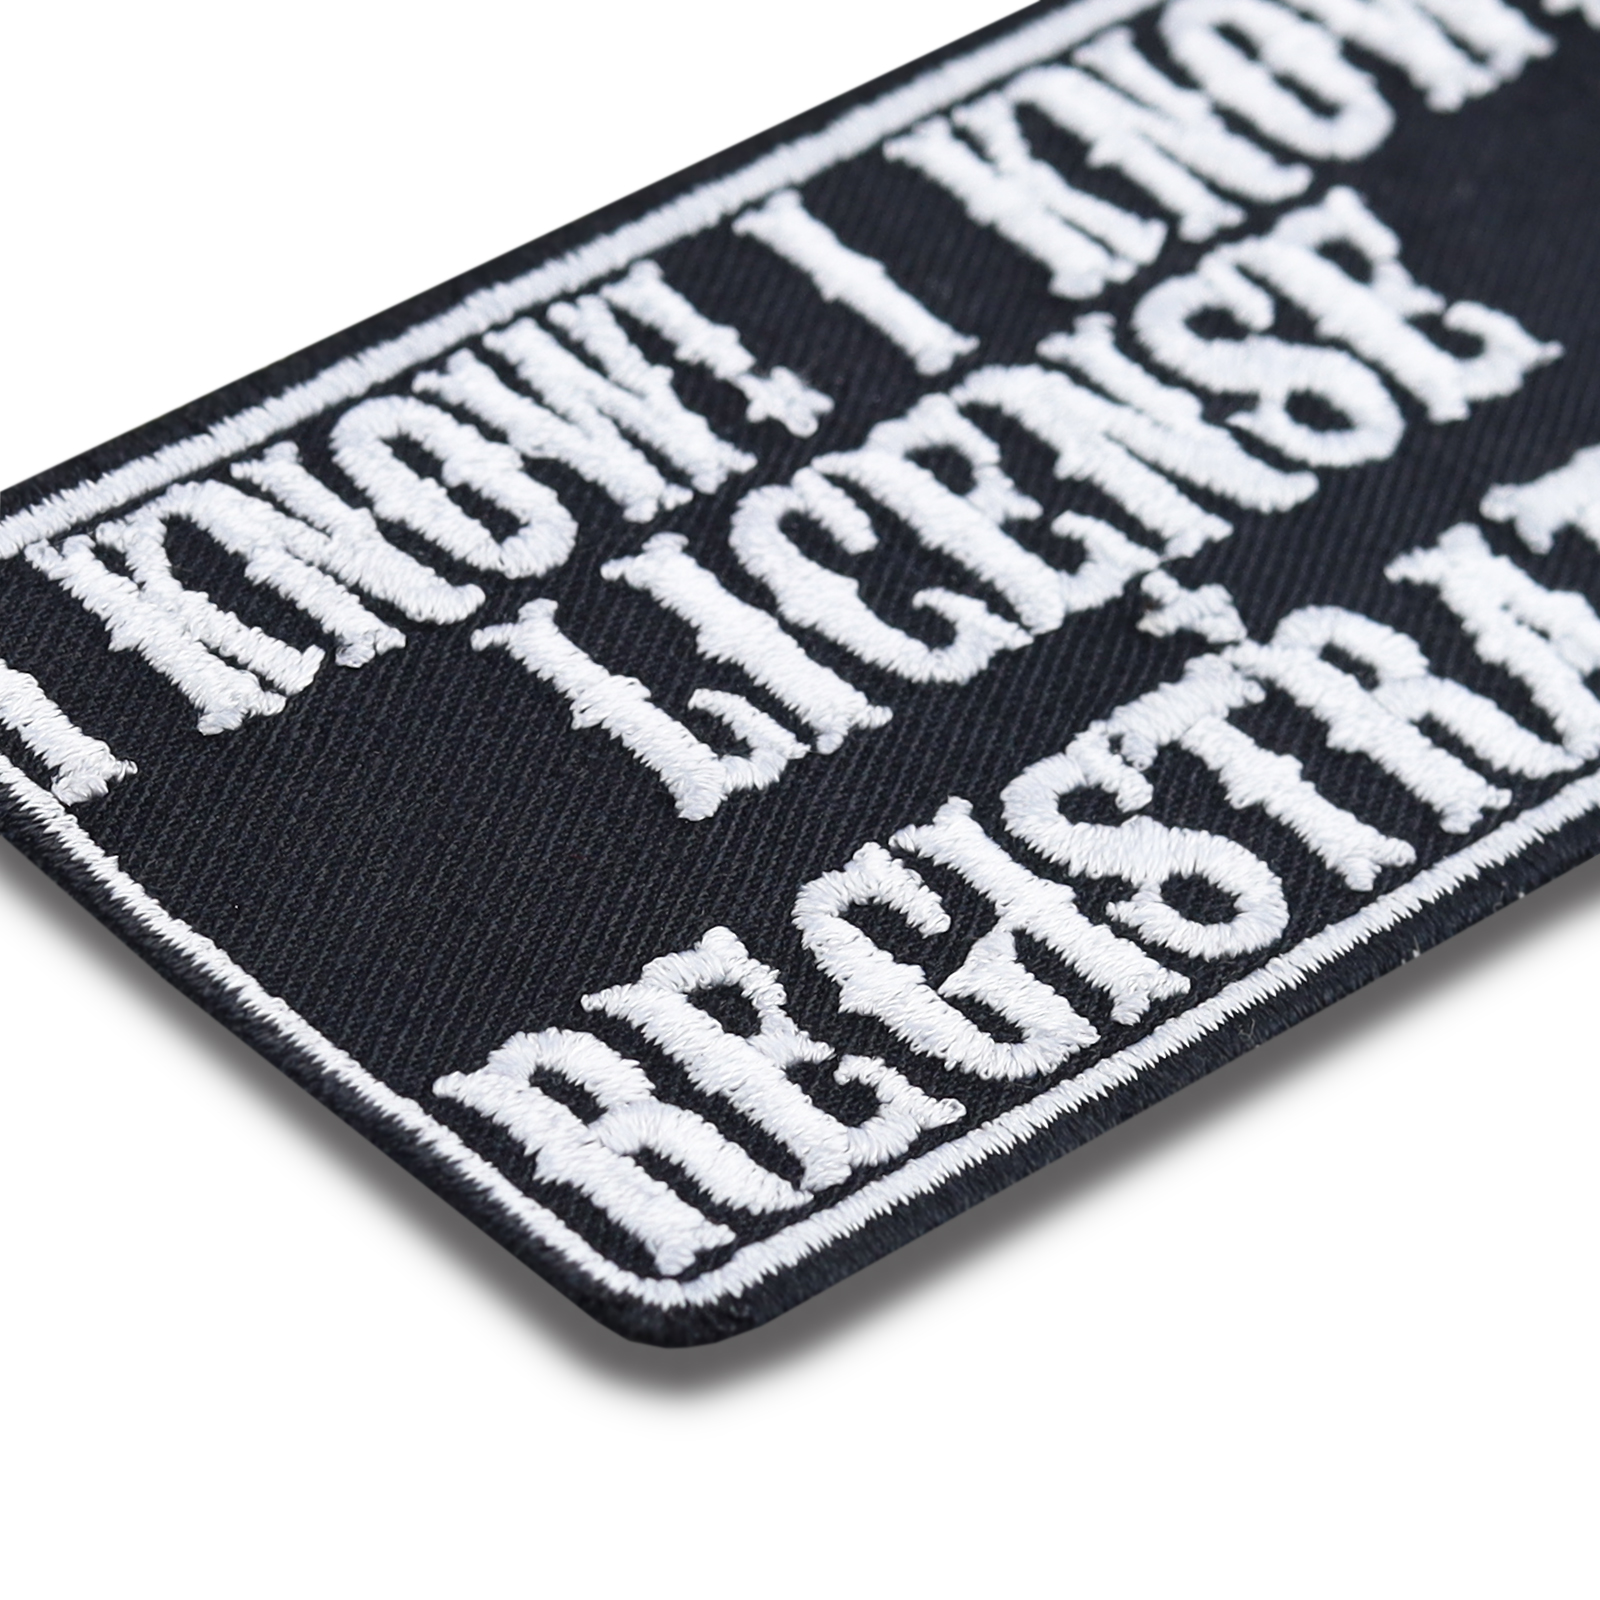 I Know! License and registration - Patch